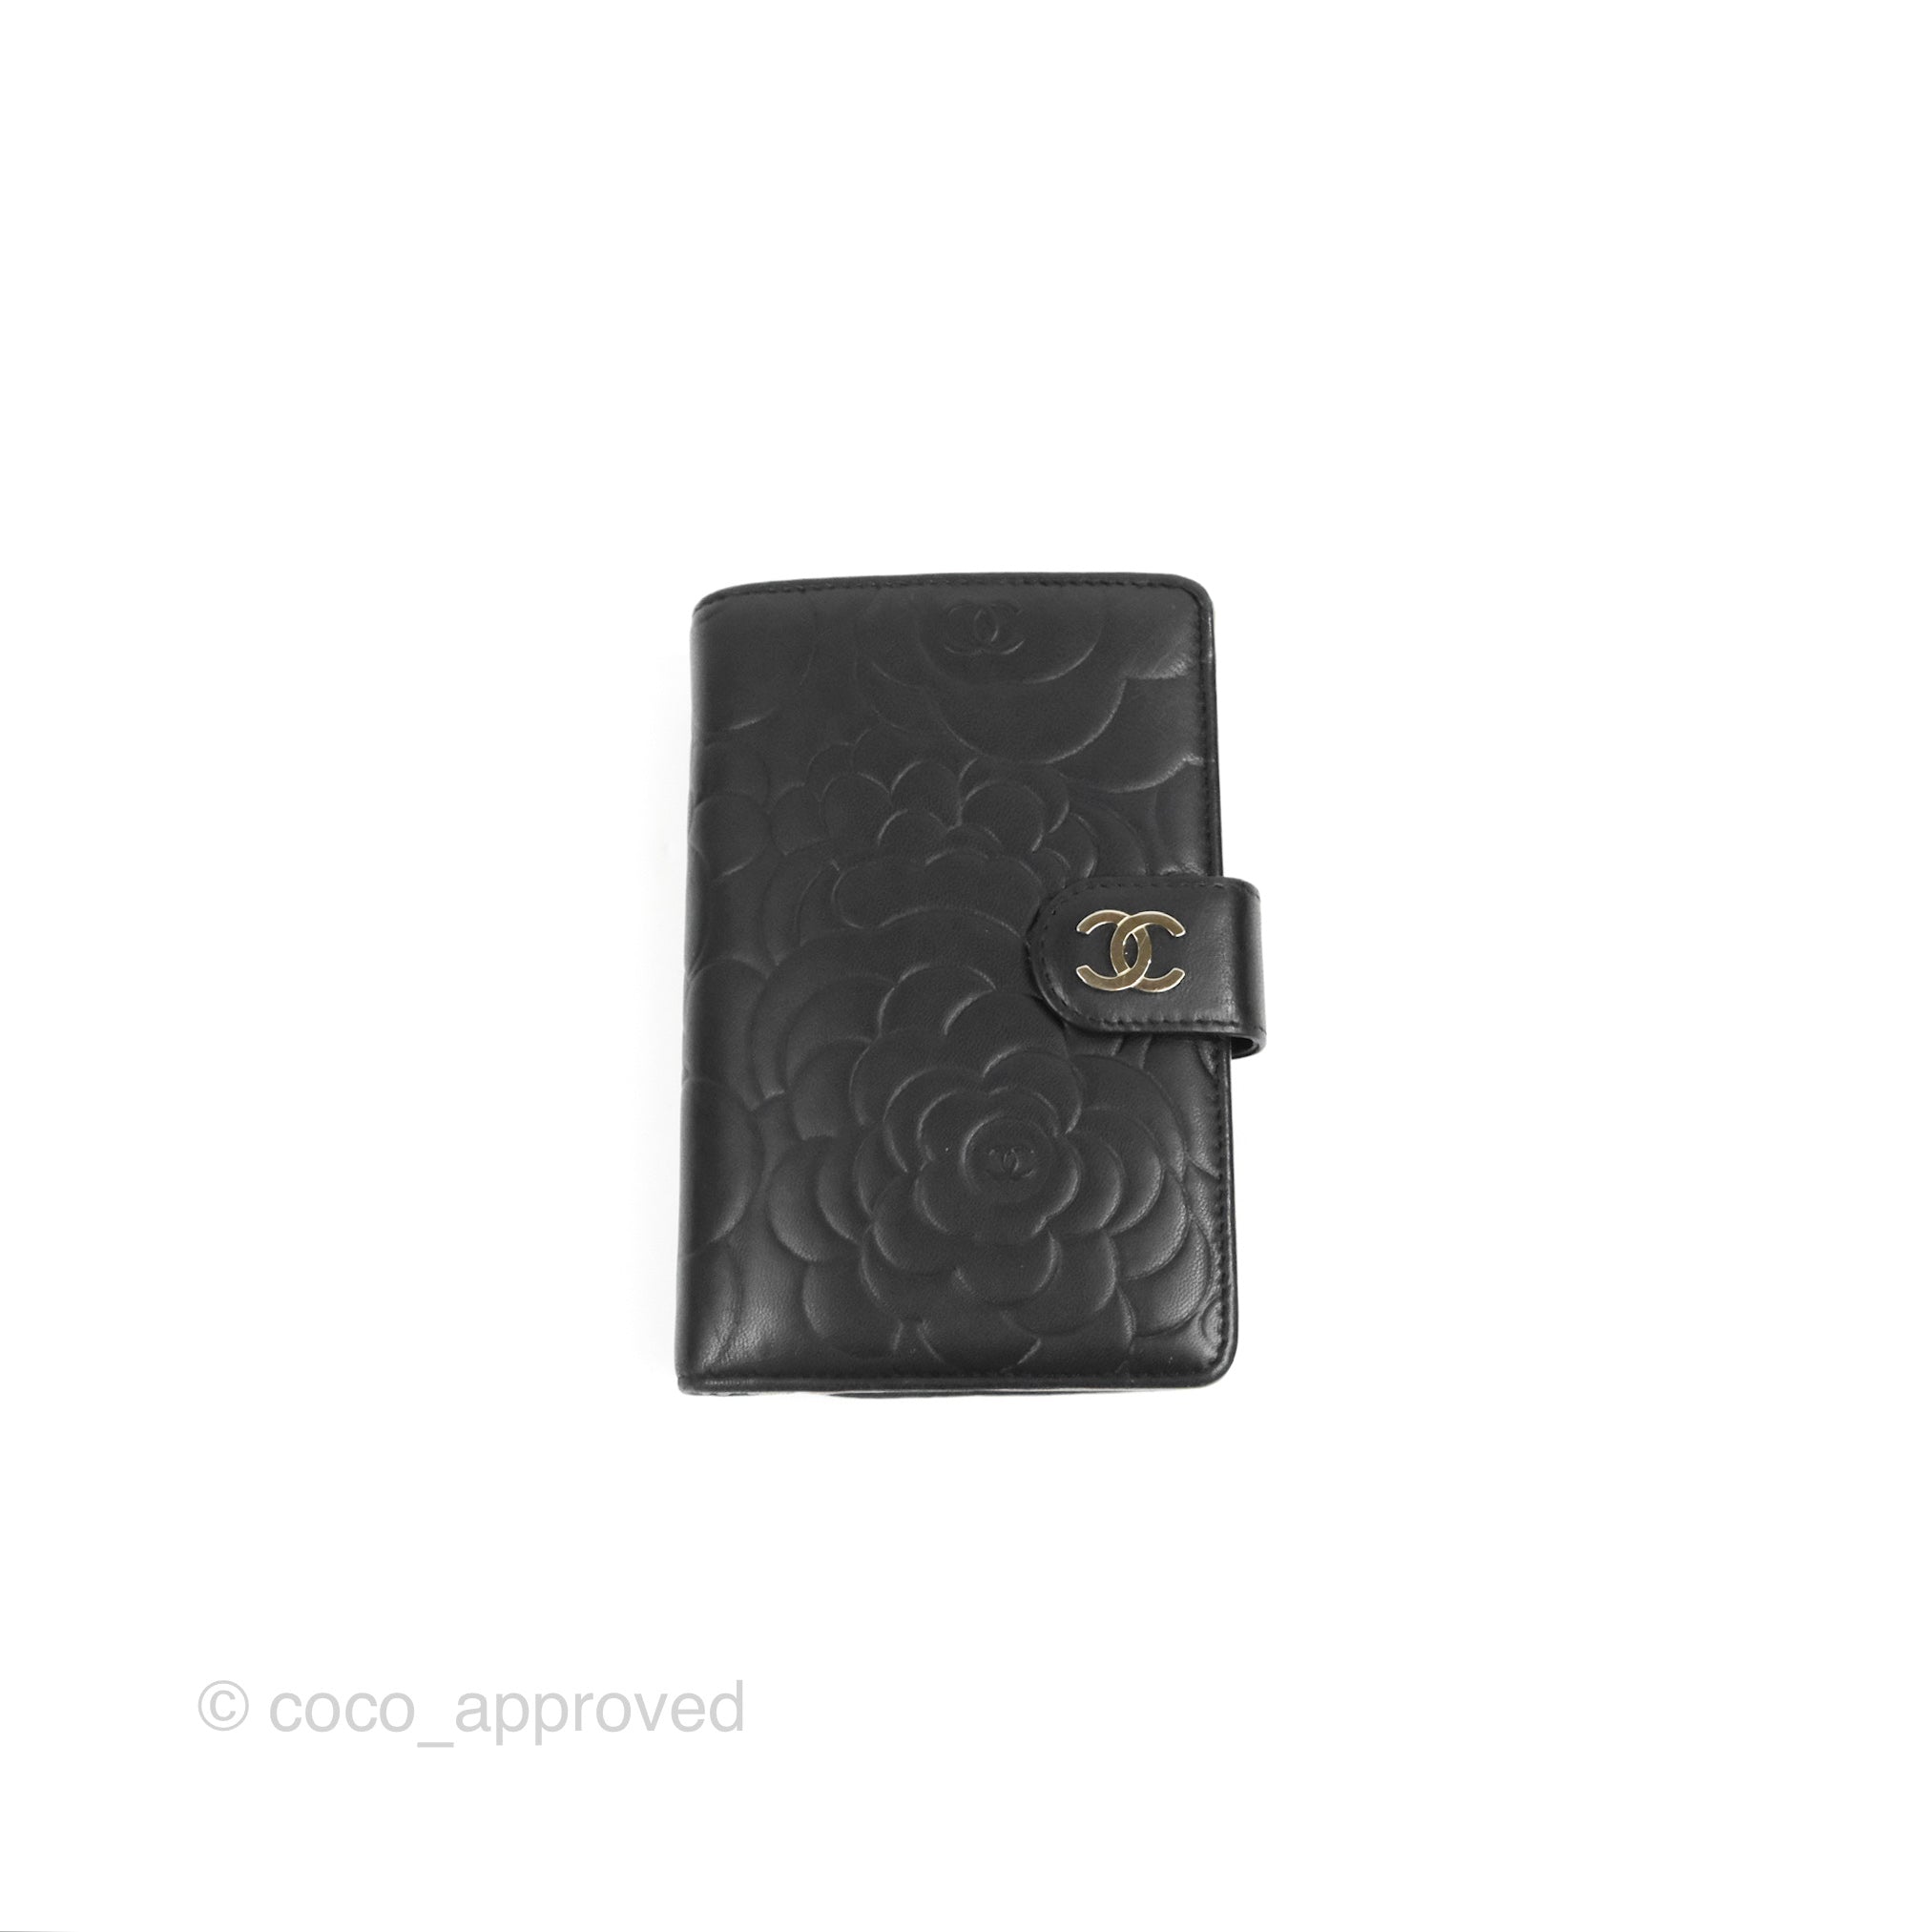 Chanel Quilted Portefeuille Wallet